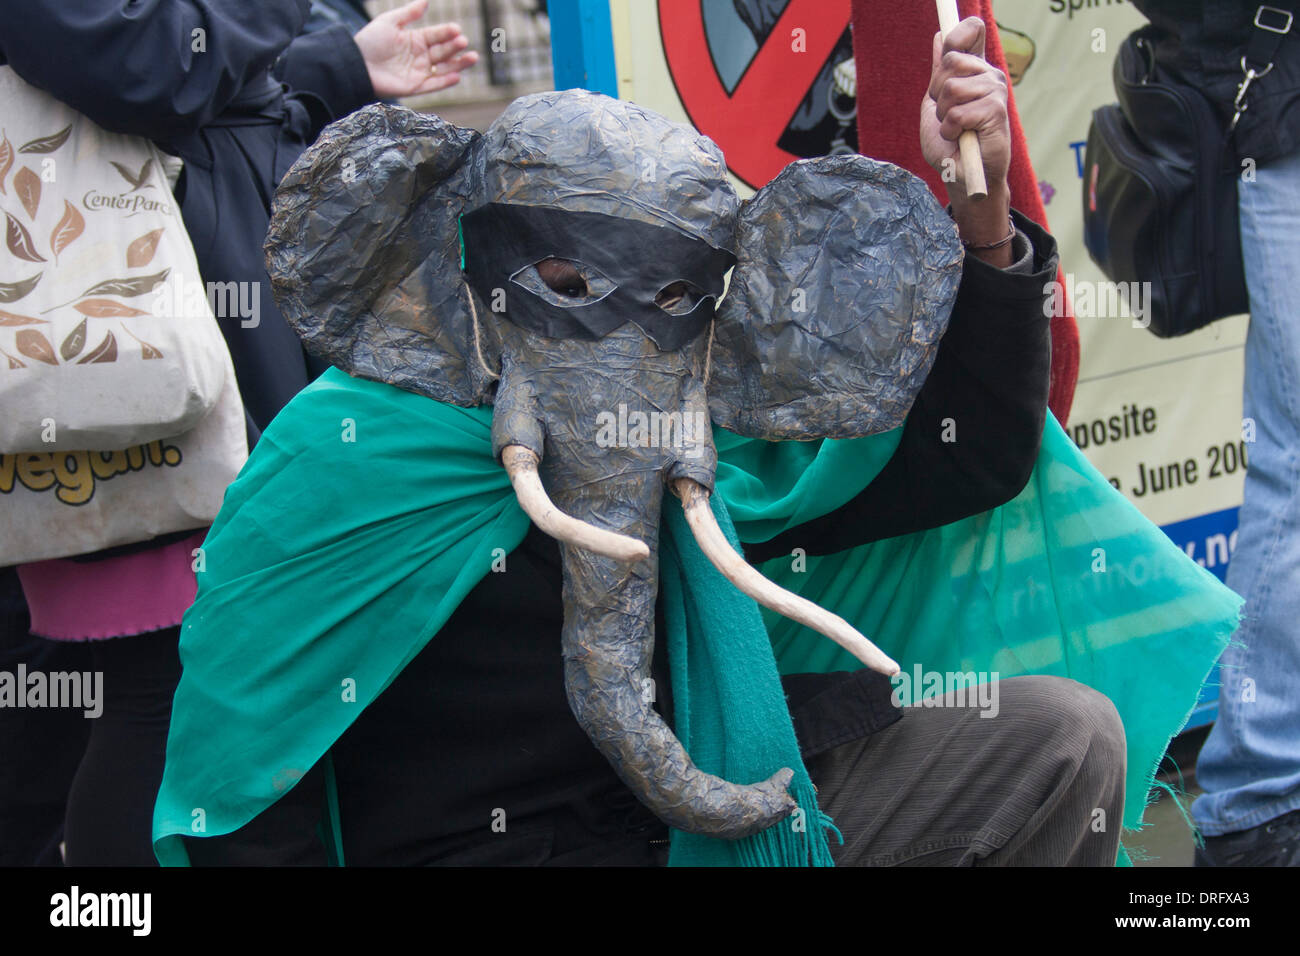 London, UK. January 25 2014. Dozens of animal rights activists demonstrate outside the Chinese embassy in London against the country's demand for ivory that is endangering elephants. Credit:  Paul Davey/Alamy Live News Stock Photo